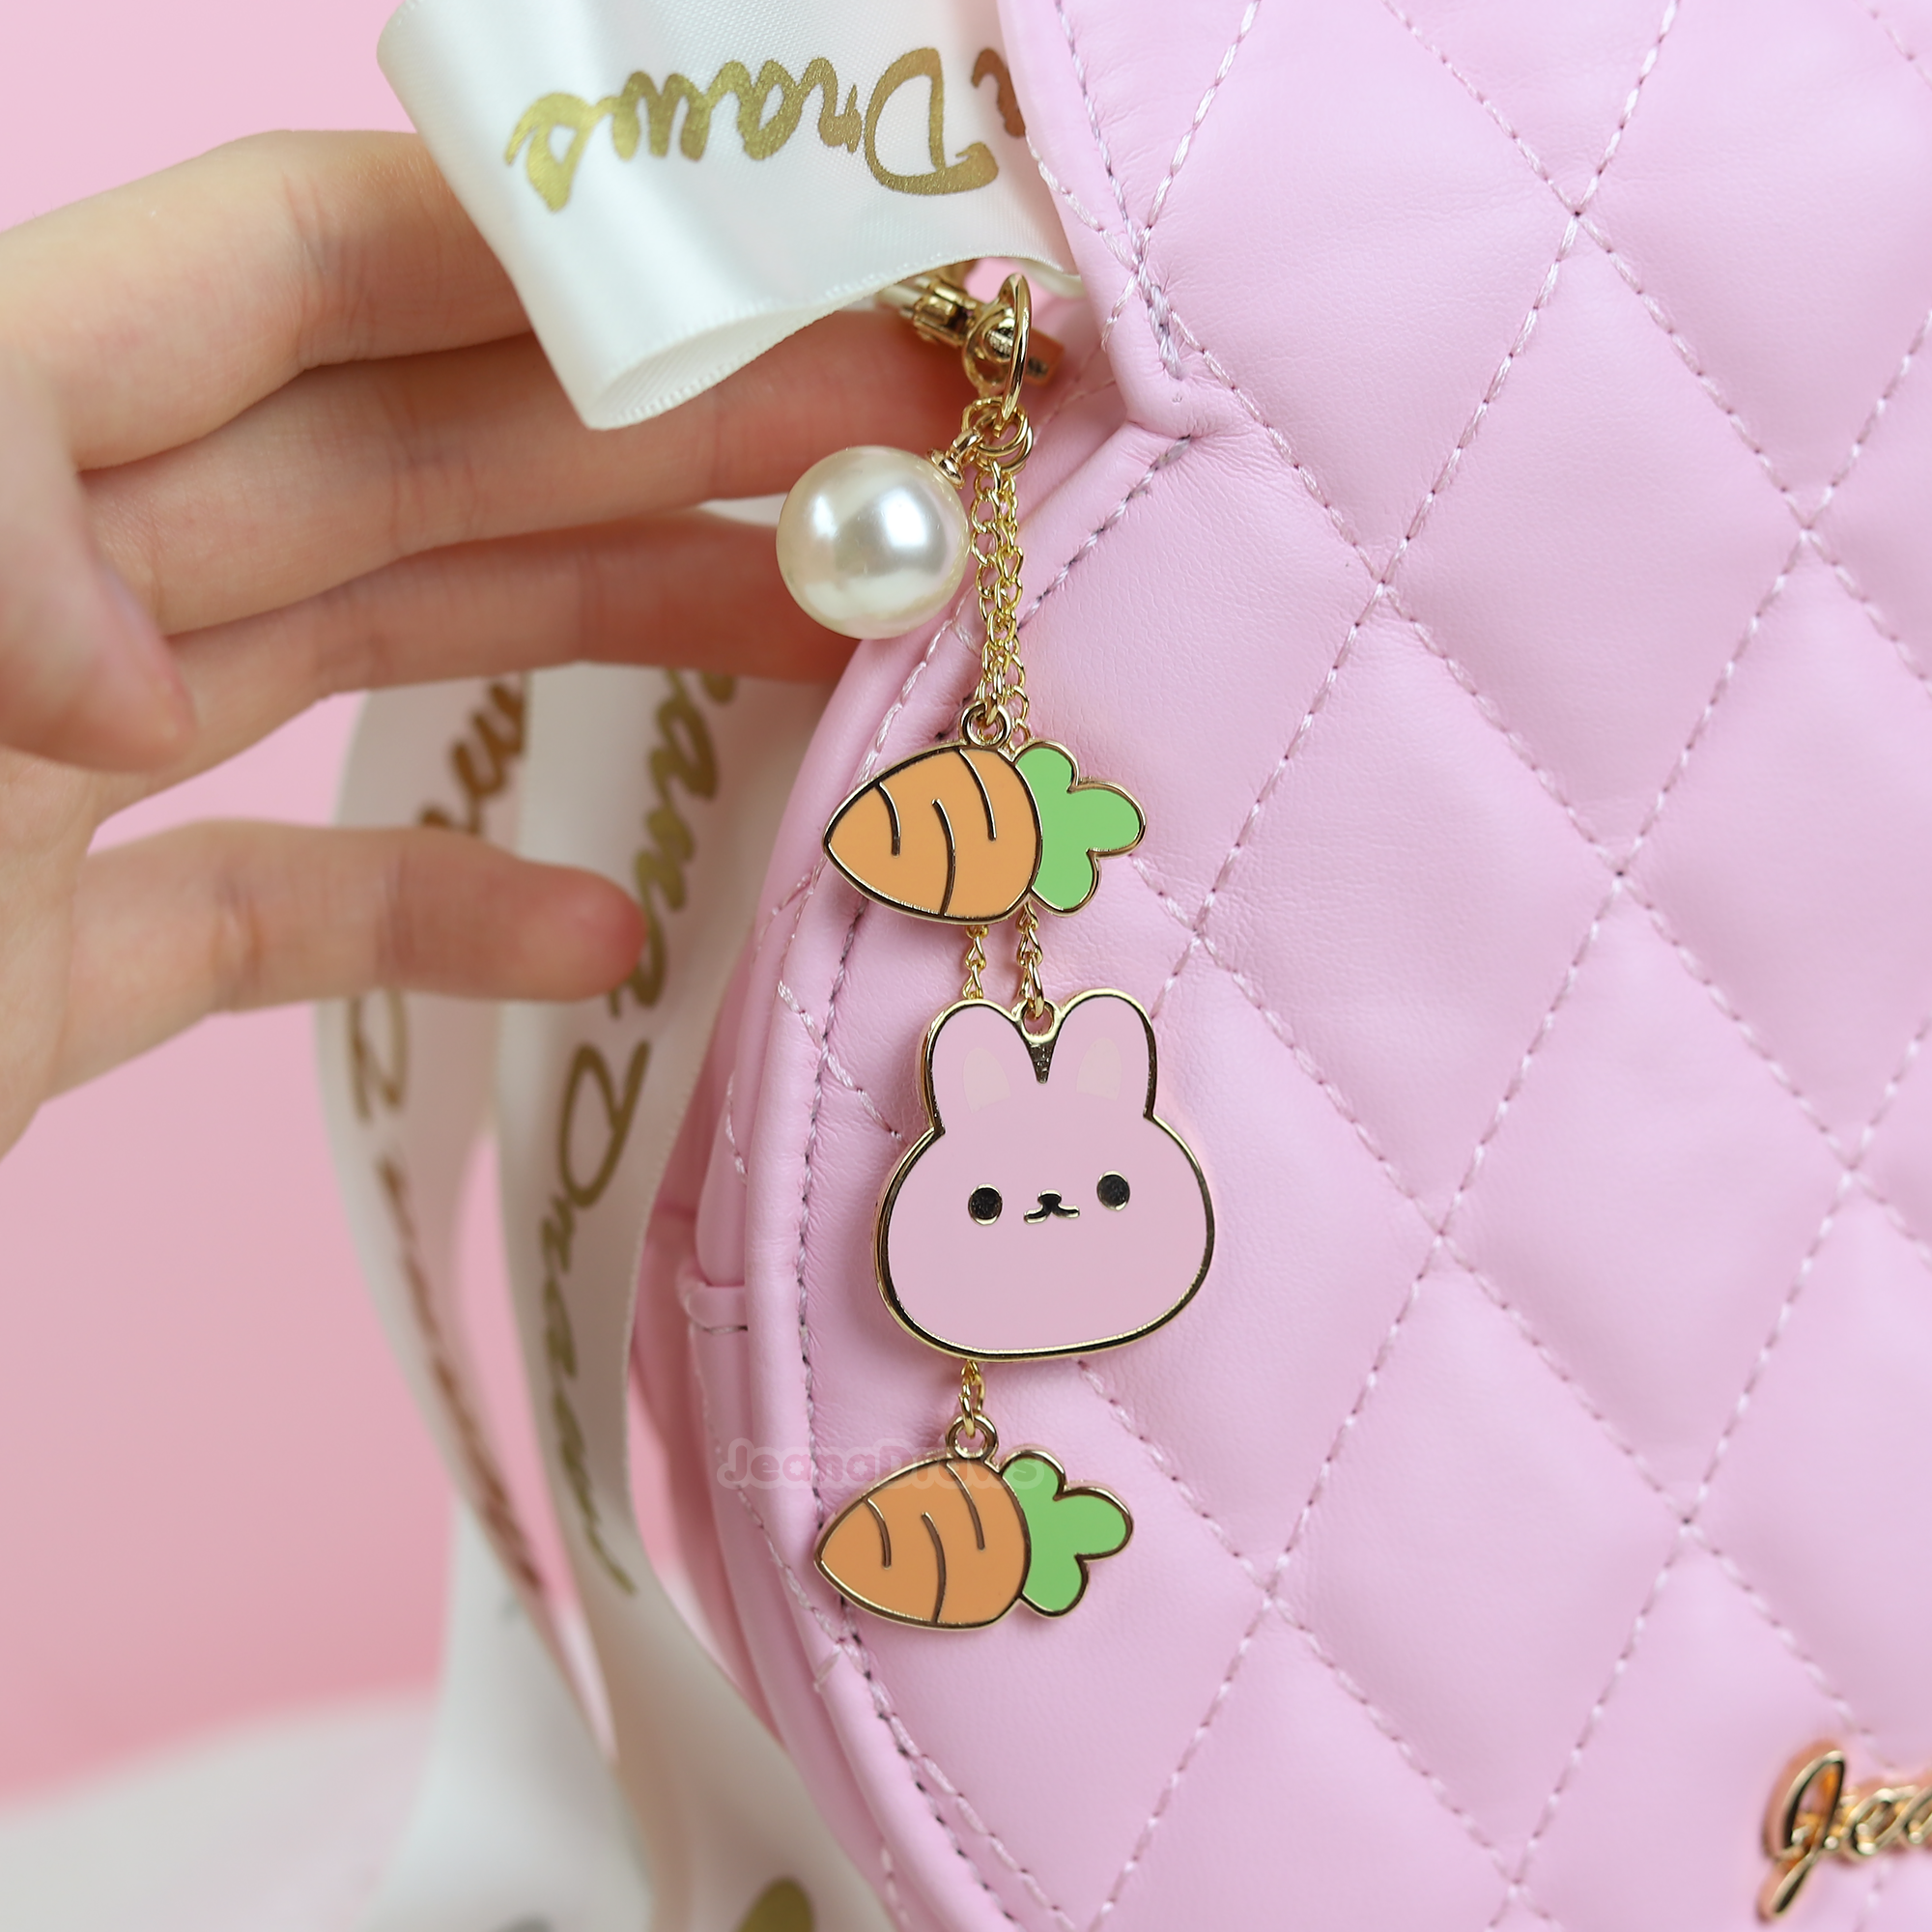 Accessories, Adorable Bunny Keychain And Bag Charm In Da Print With  Swarovski Crystal